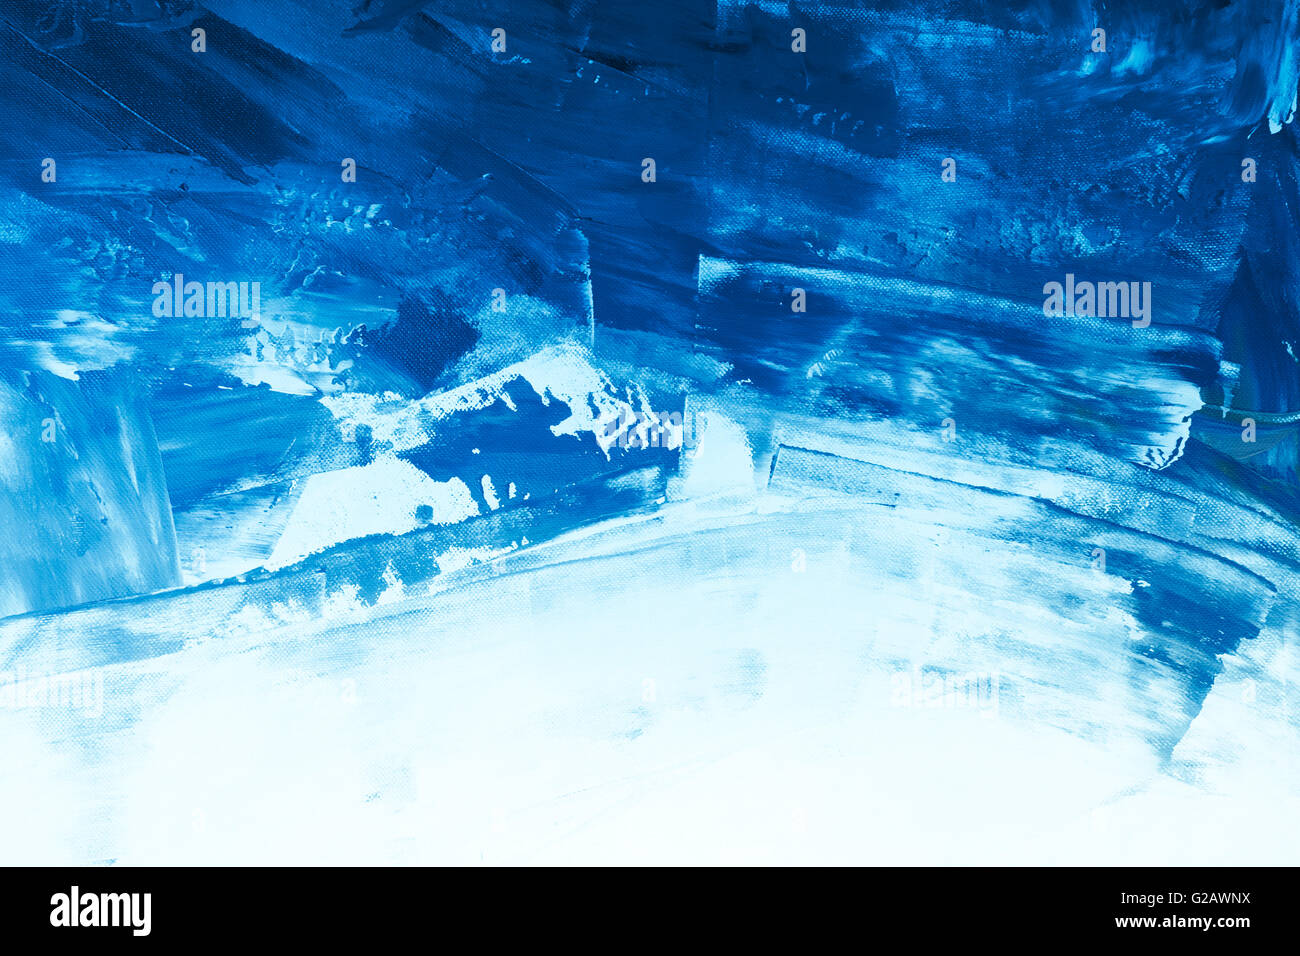 The strokes of a white watercolor paint on a blue paint on a canvas.  Background, texture, wallpaper Stock Photo - Alamy